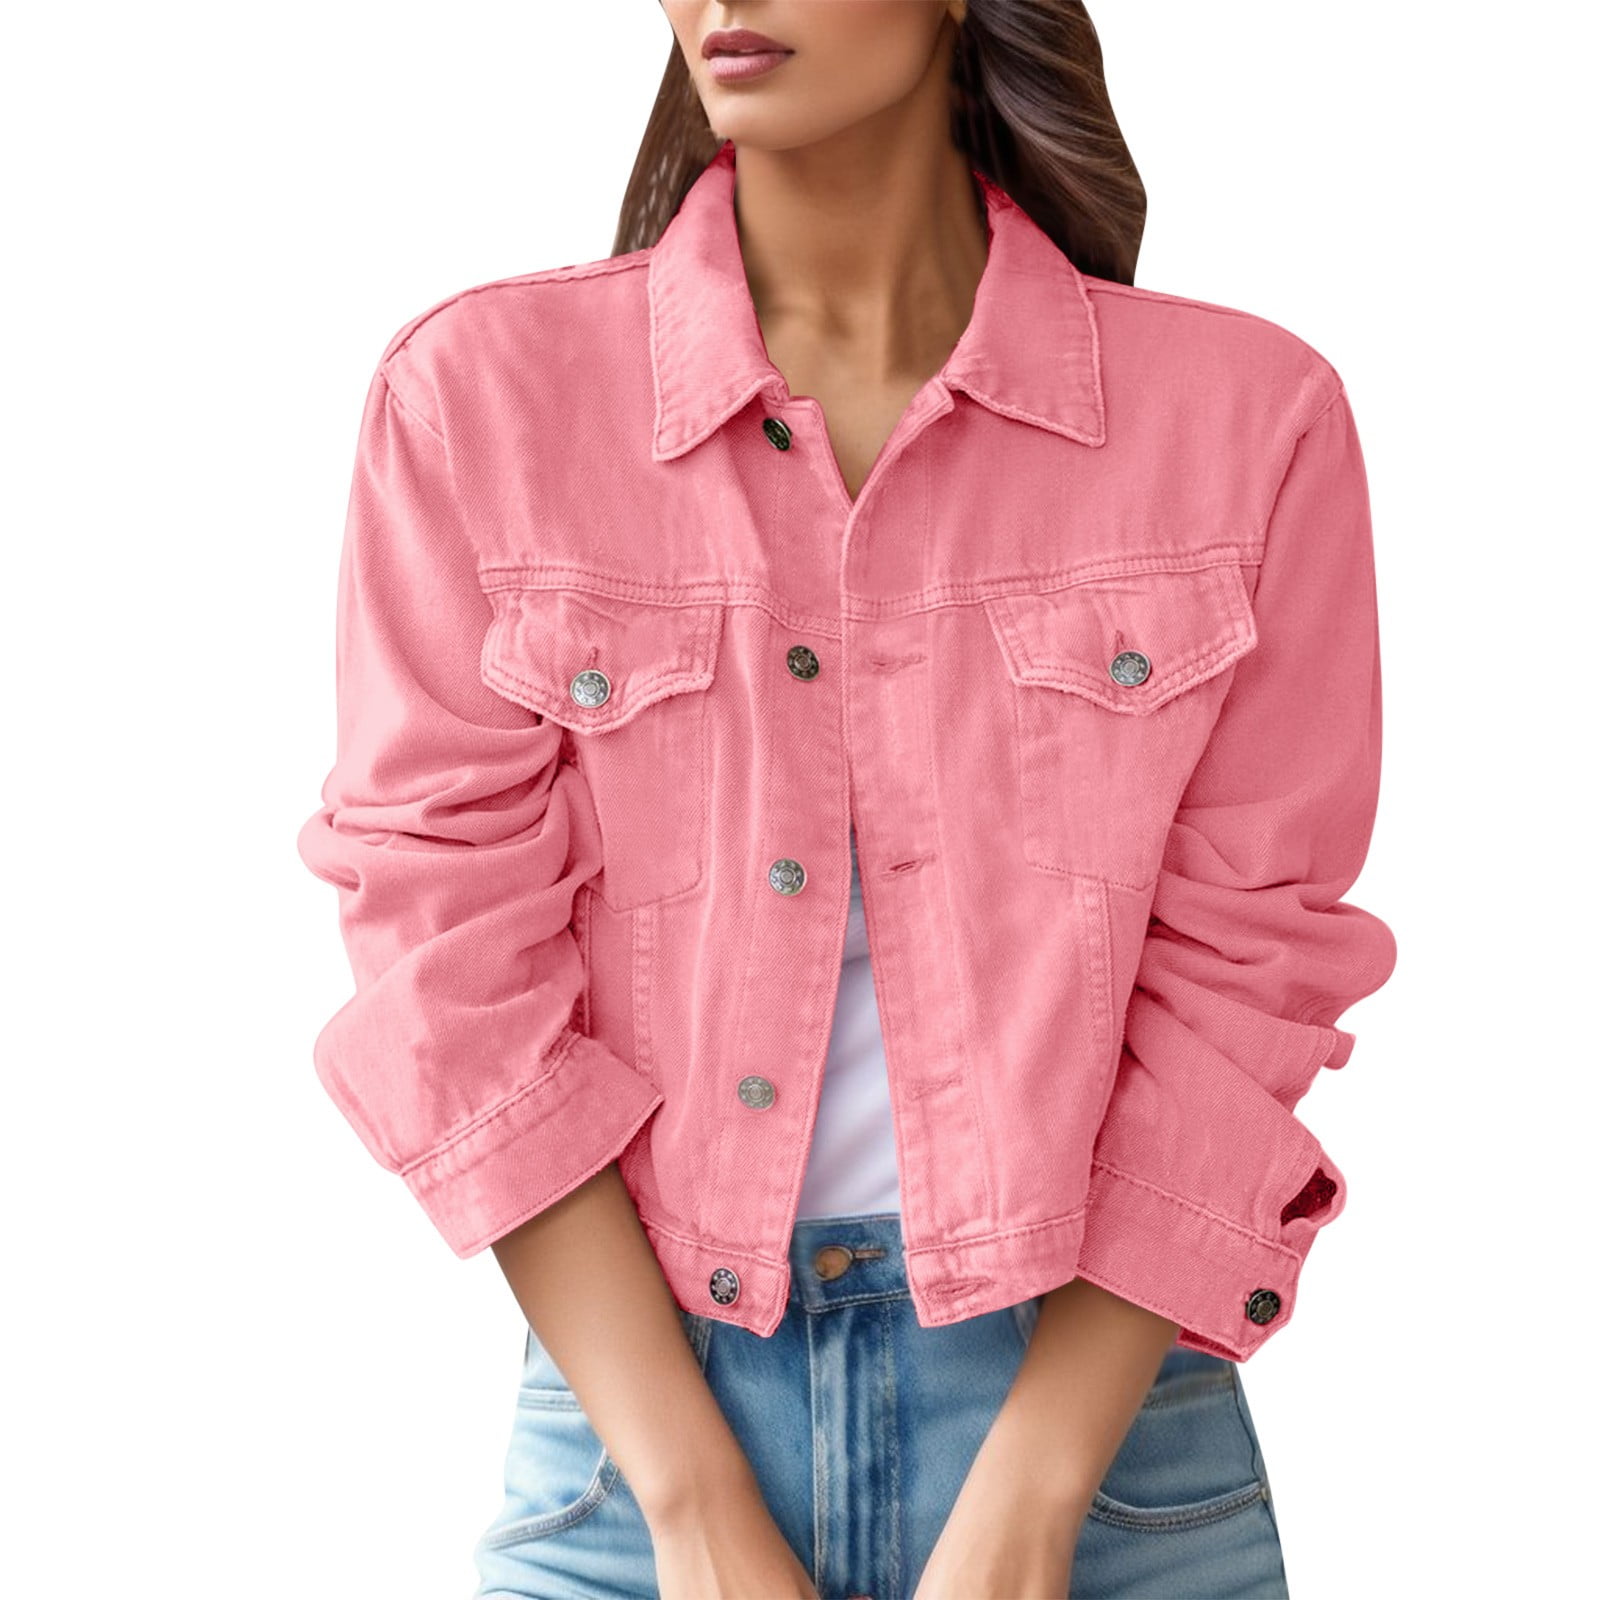 Womens Jackets Short Denim Jacket Women Ripped Jeans Coat Distressed Sexy  Ladies Cute Crop Top Cardigan Designer Outerwear Female Outwear From 29,02  € | DHgate